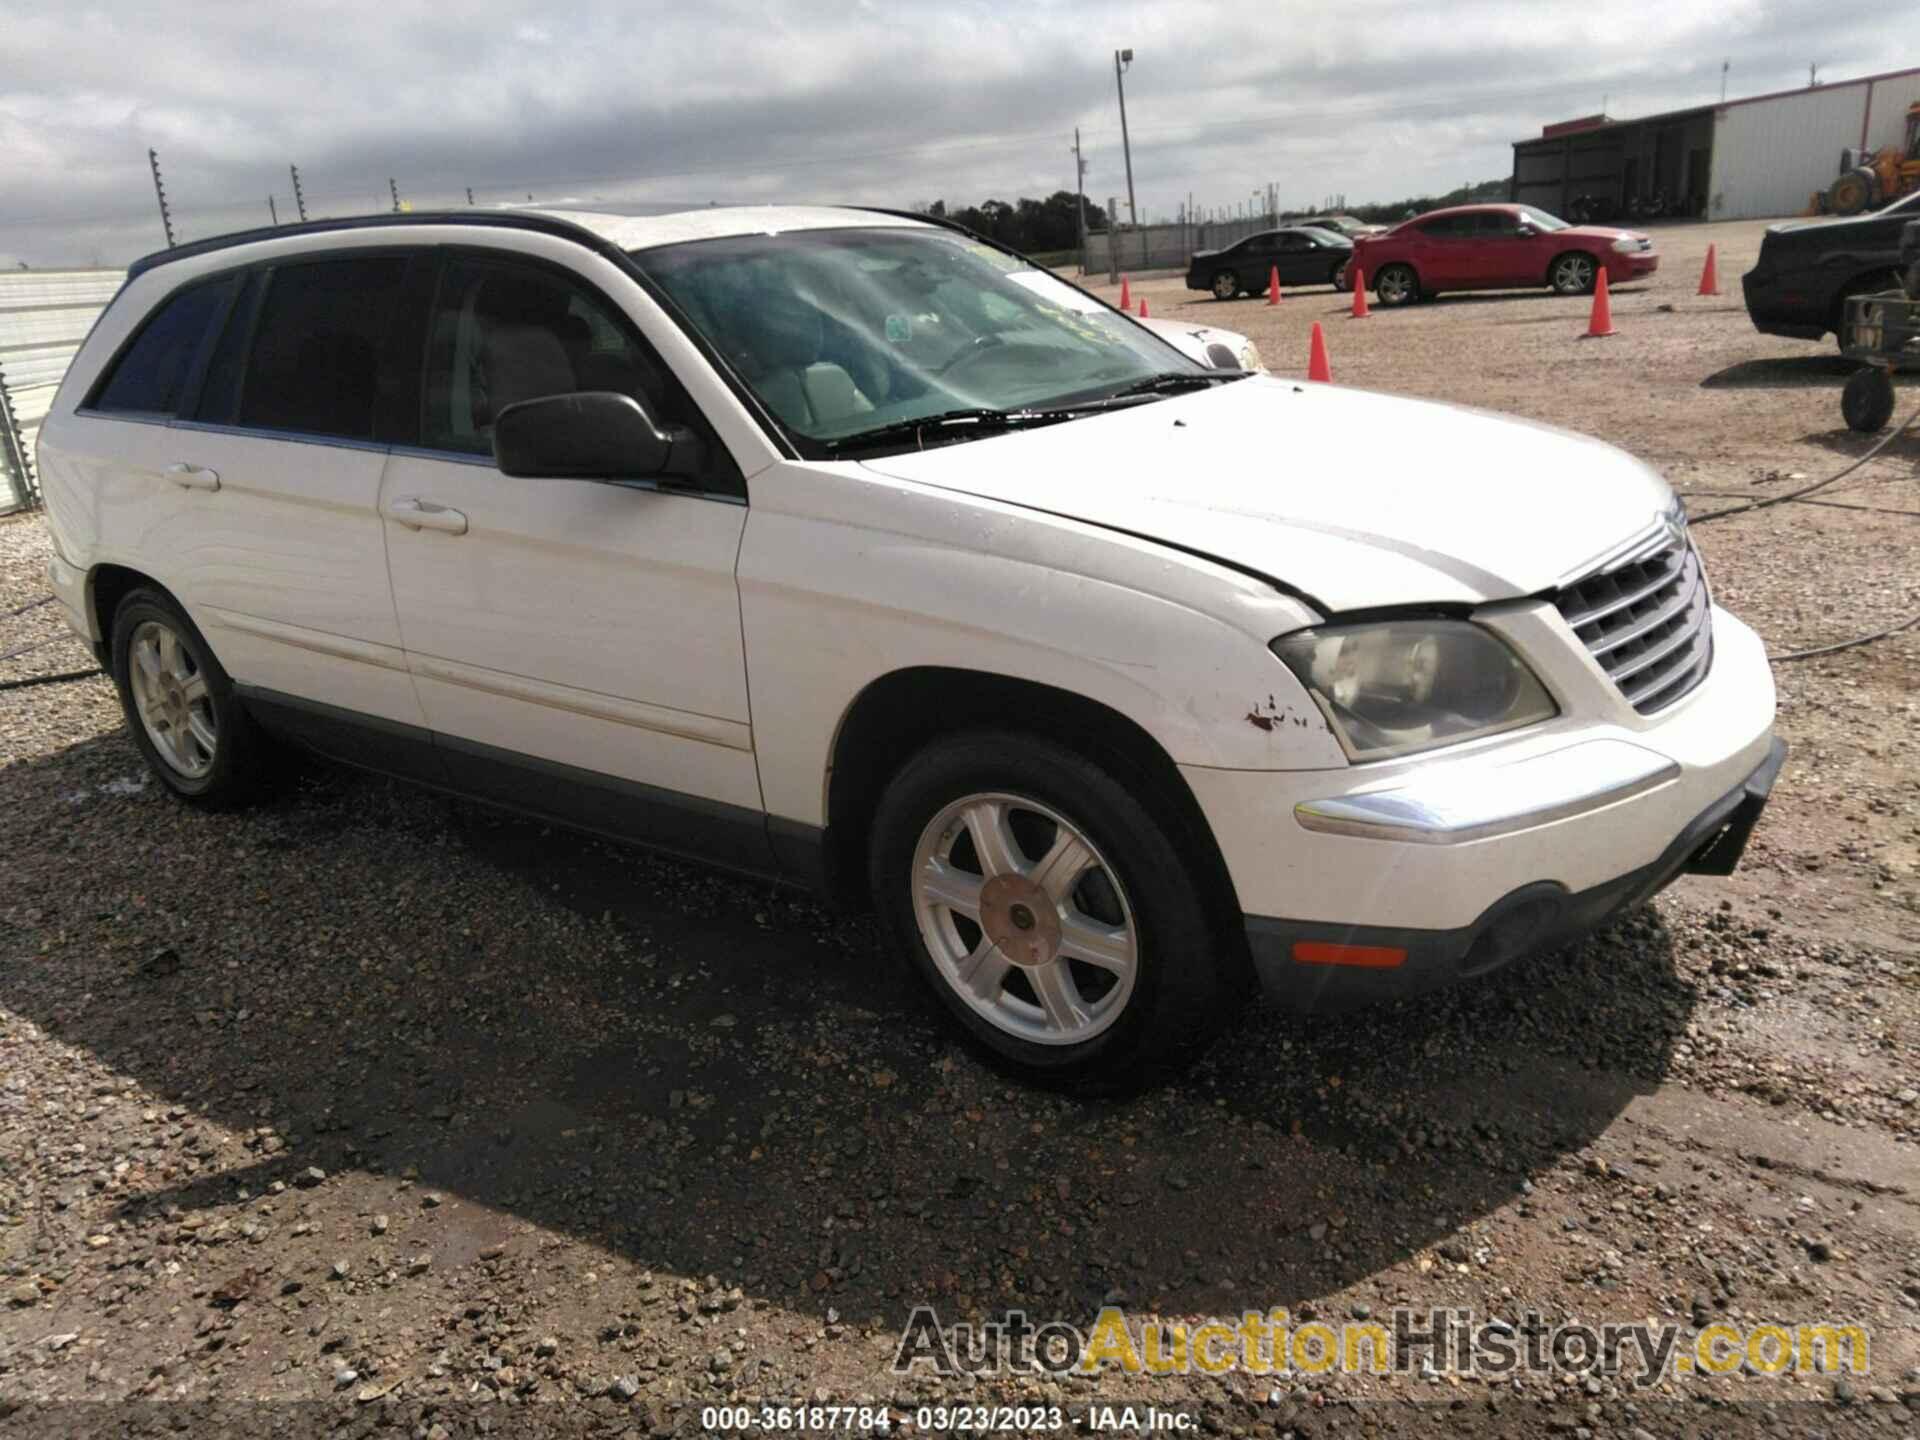 CHRYSLER PACIFICA TOURING, 2A4GM68466R736334